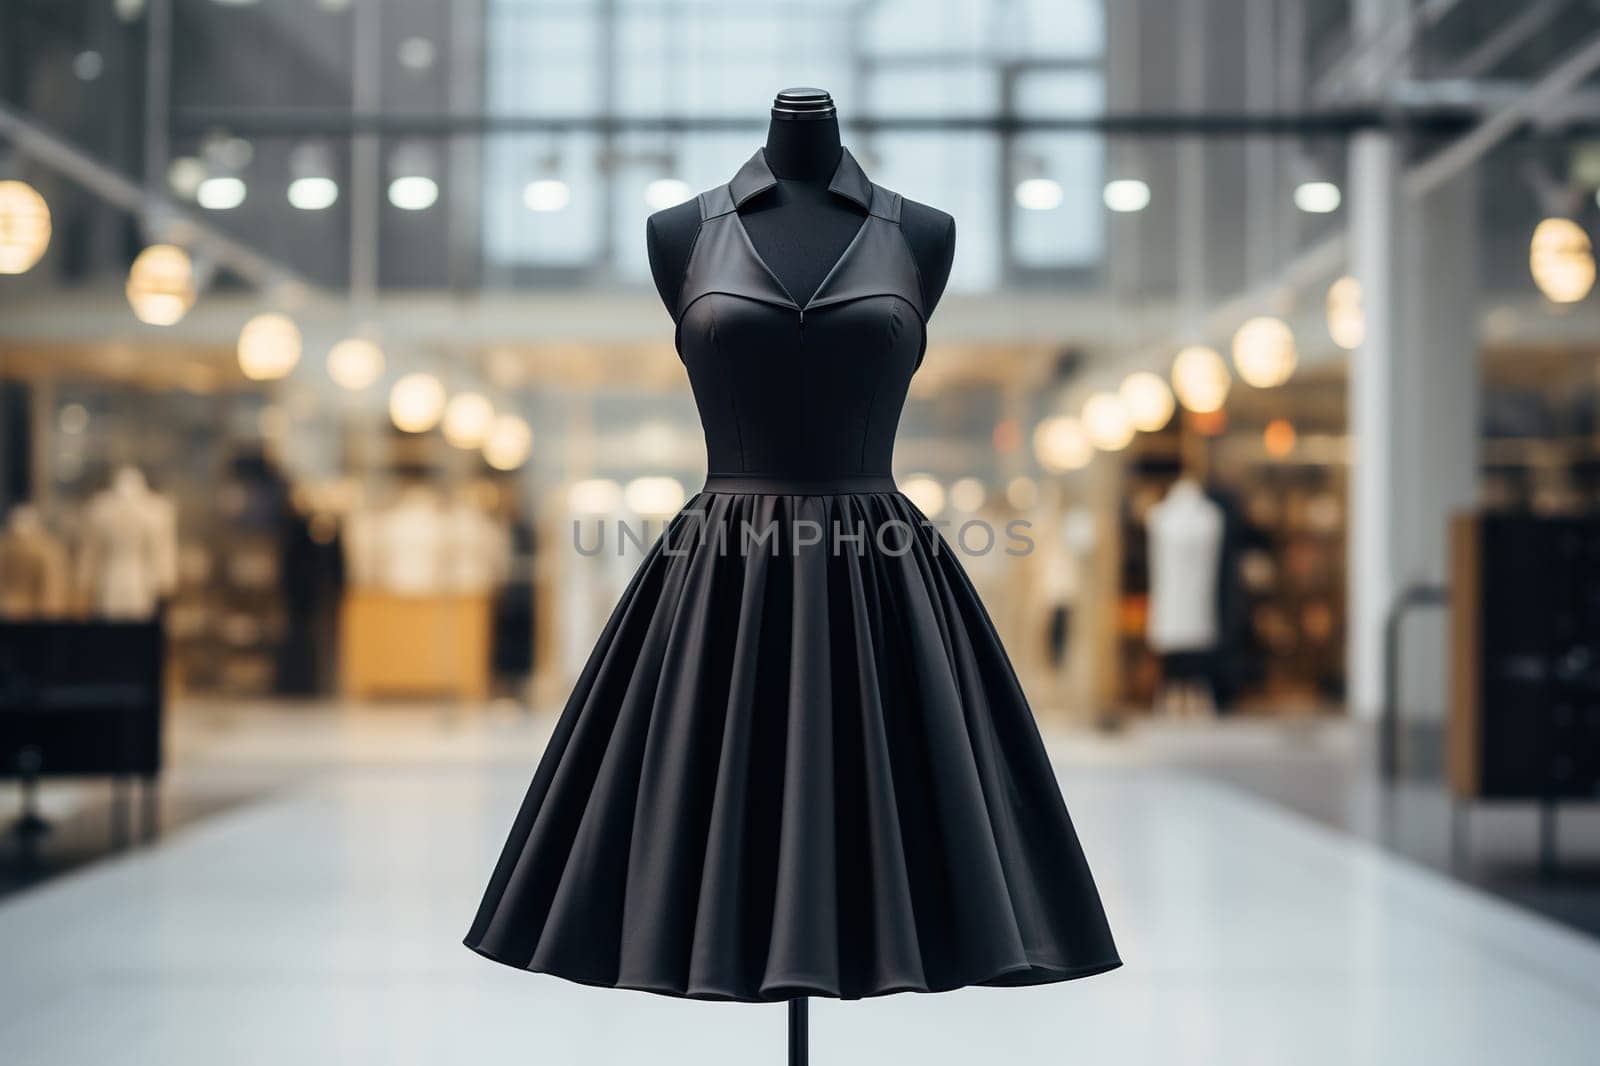 A beautiful black dress on a mannequin in a fashion salon. Shopping, vogue concept.